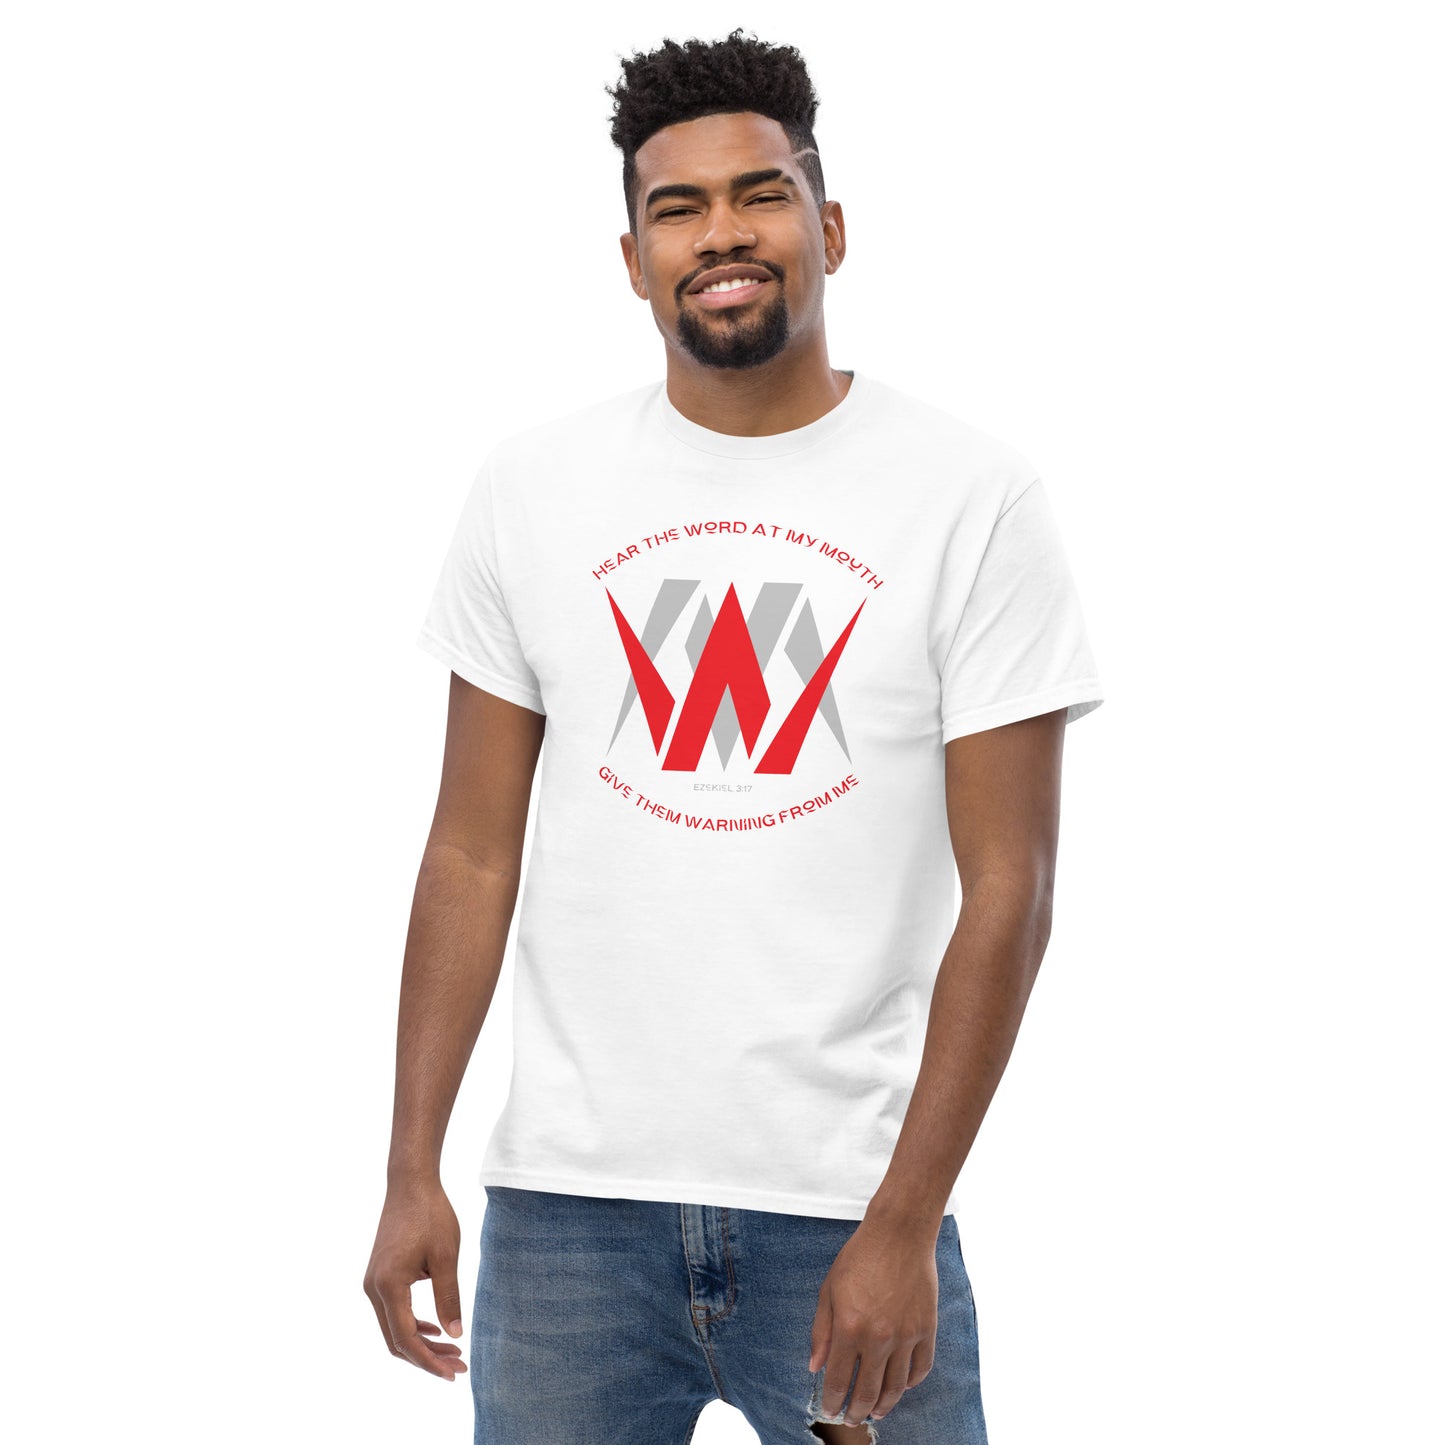 WM Hear The Word At My Mouth Give Them Warning From Me Men's classic tee